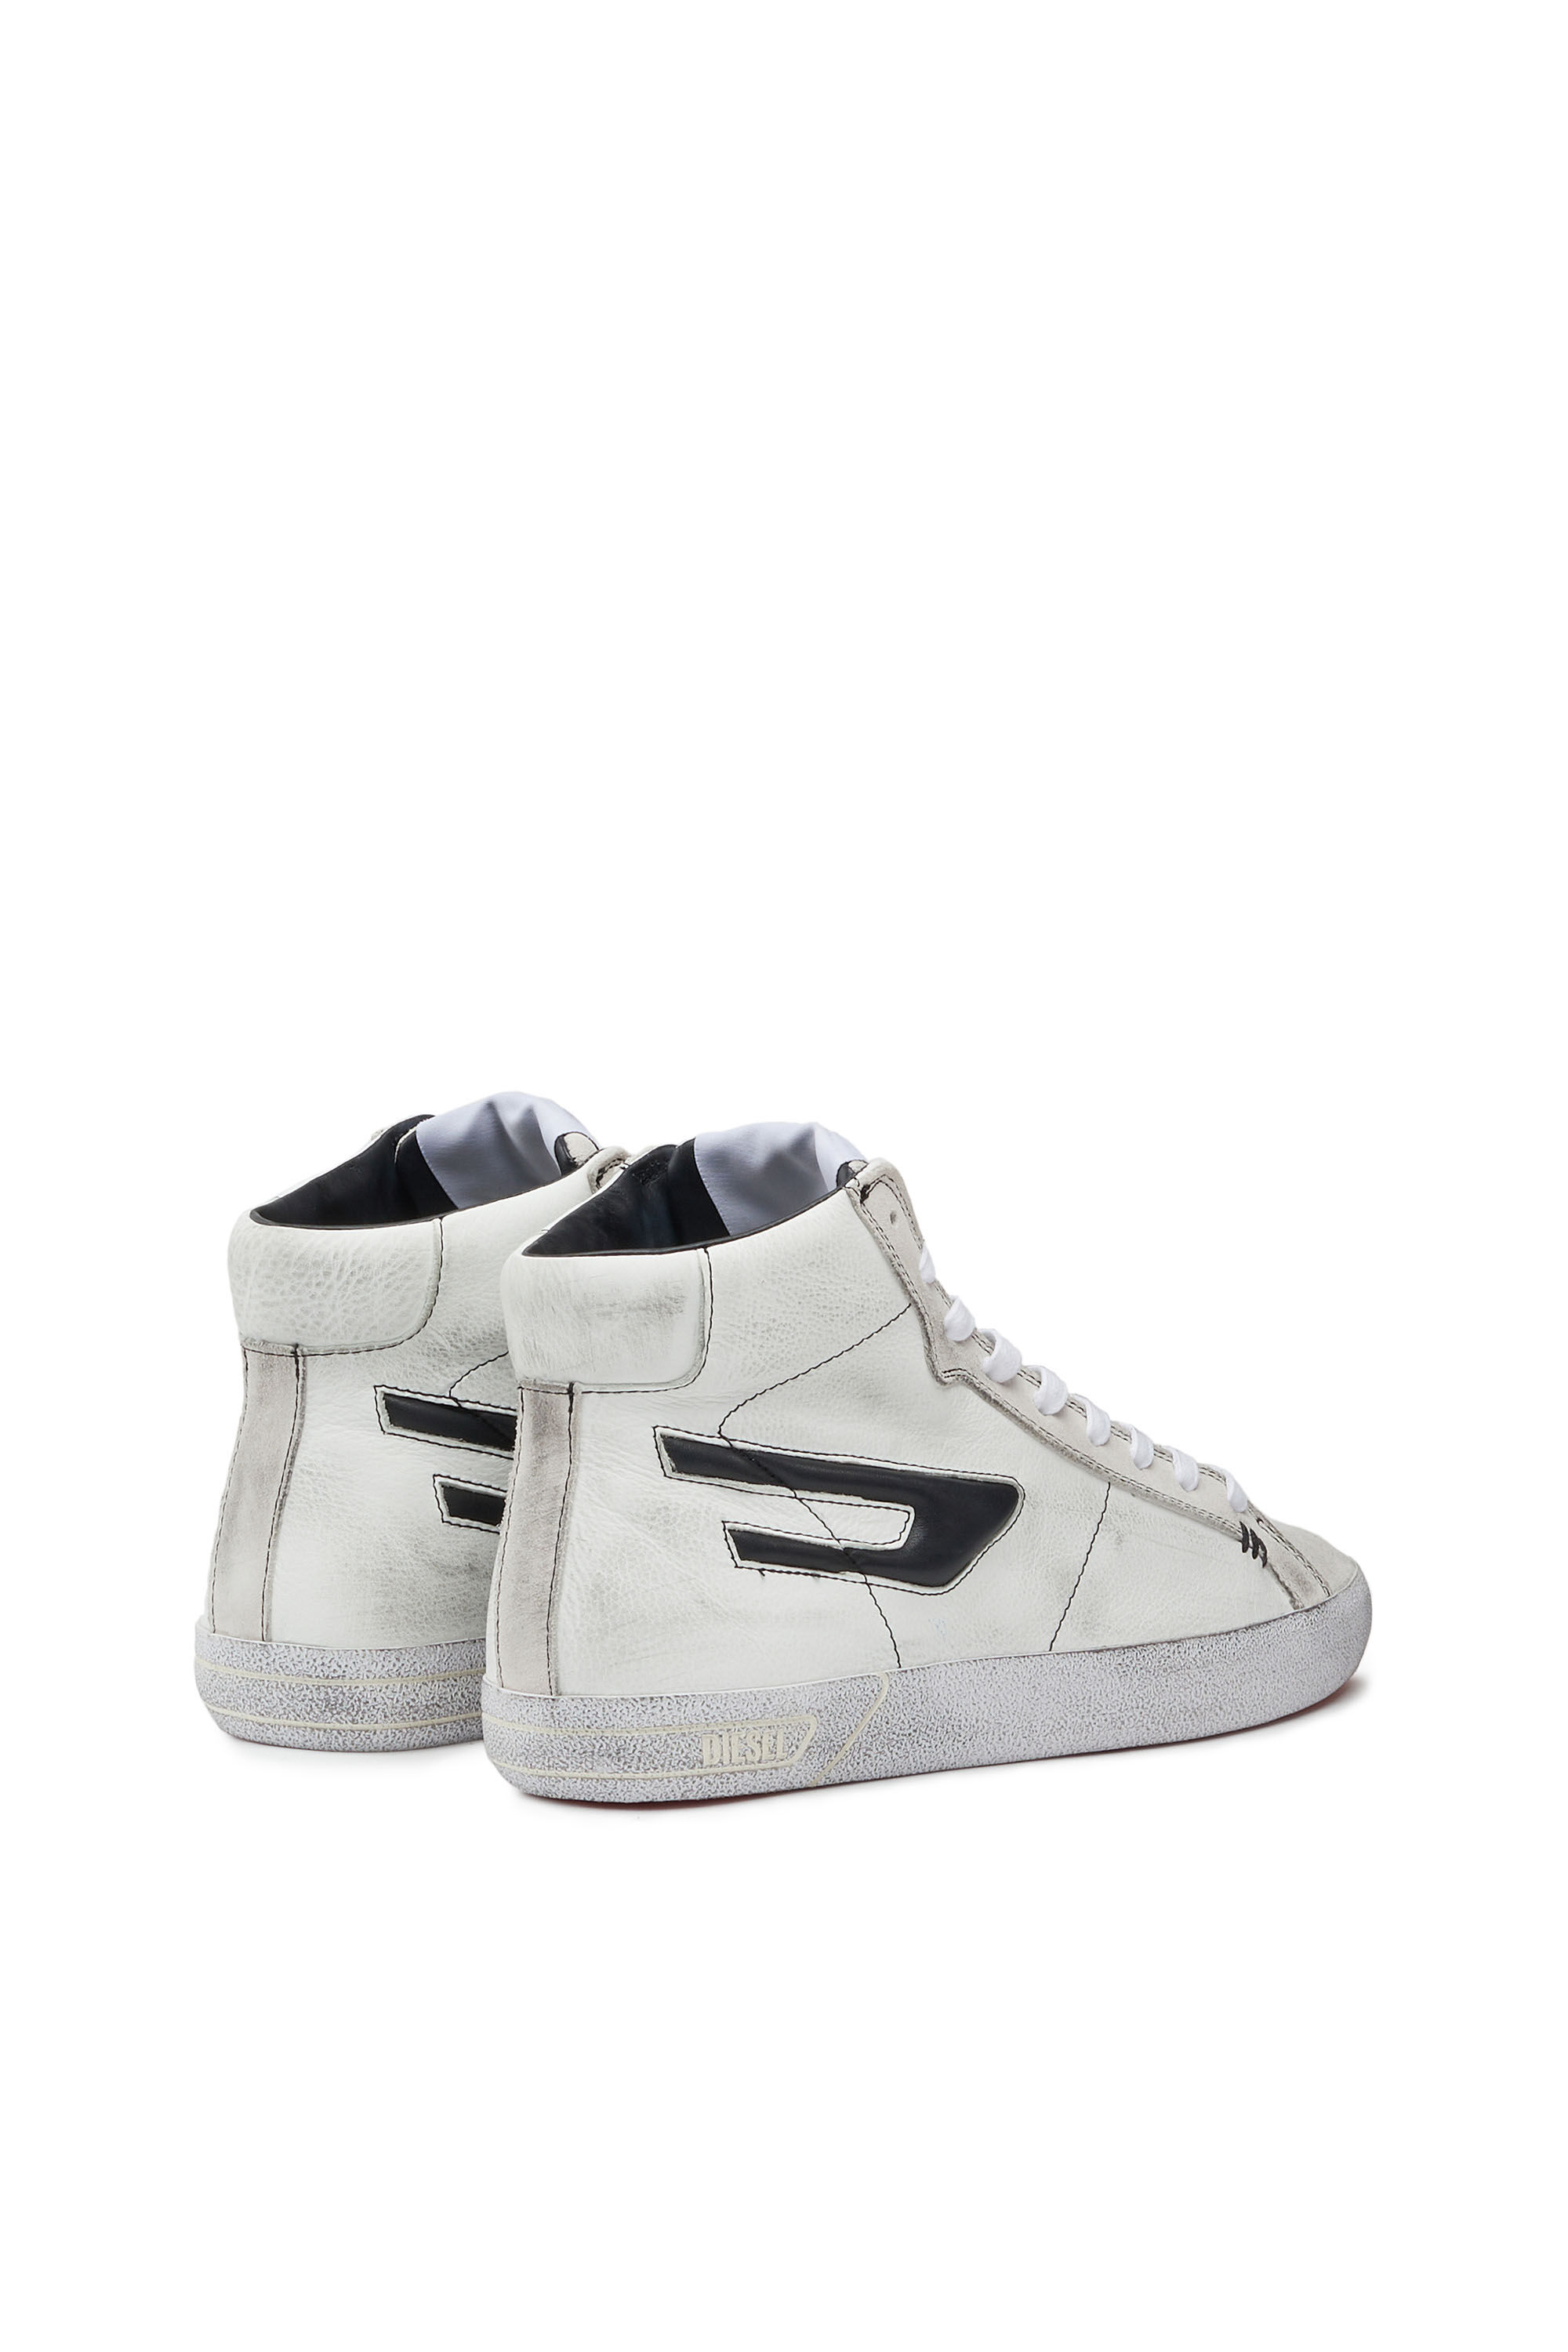 Women's High-top leather sneakers with D logo | Diesel